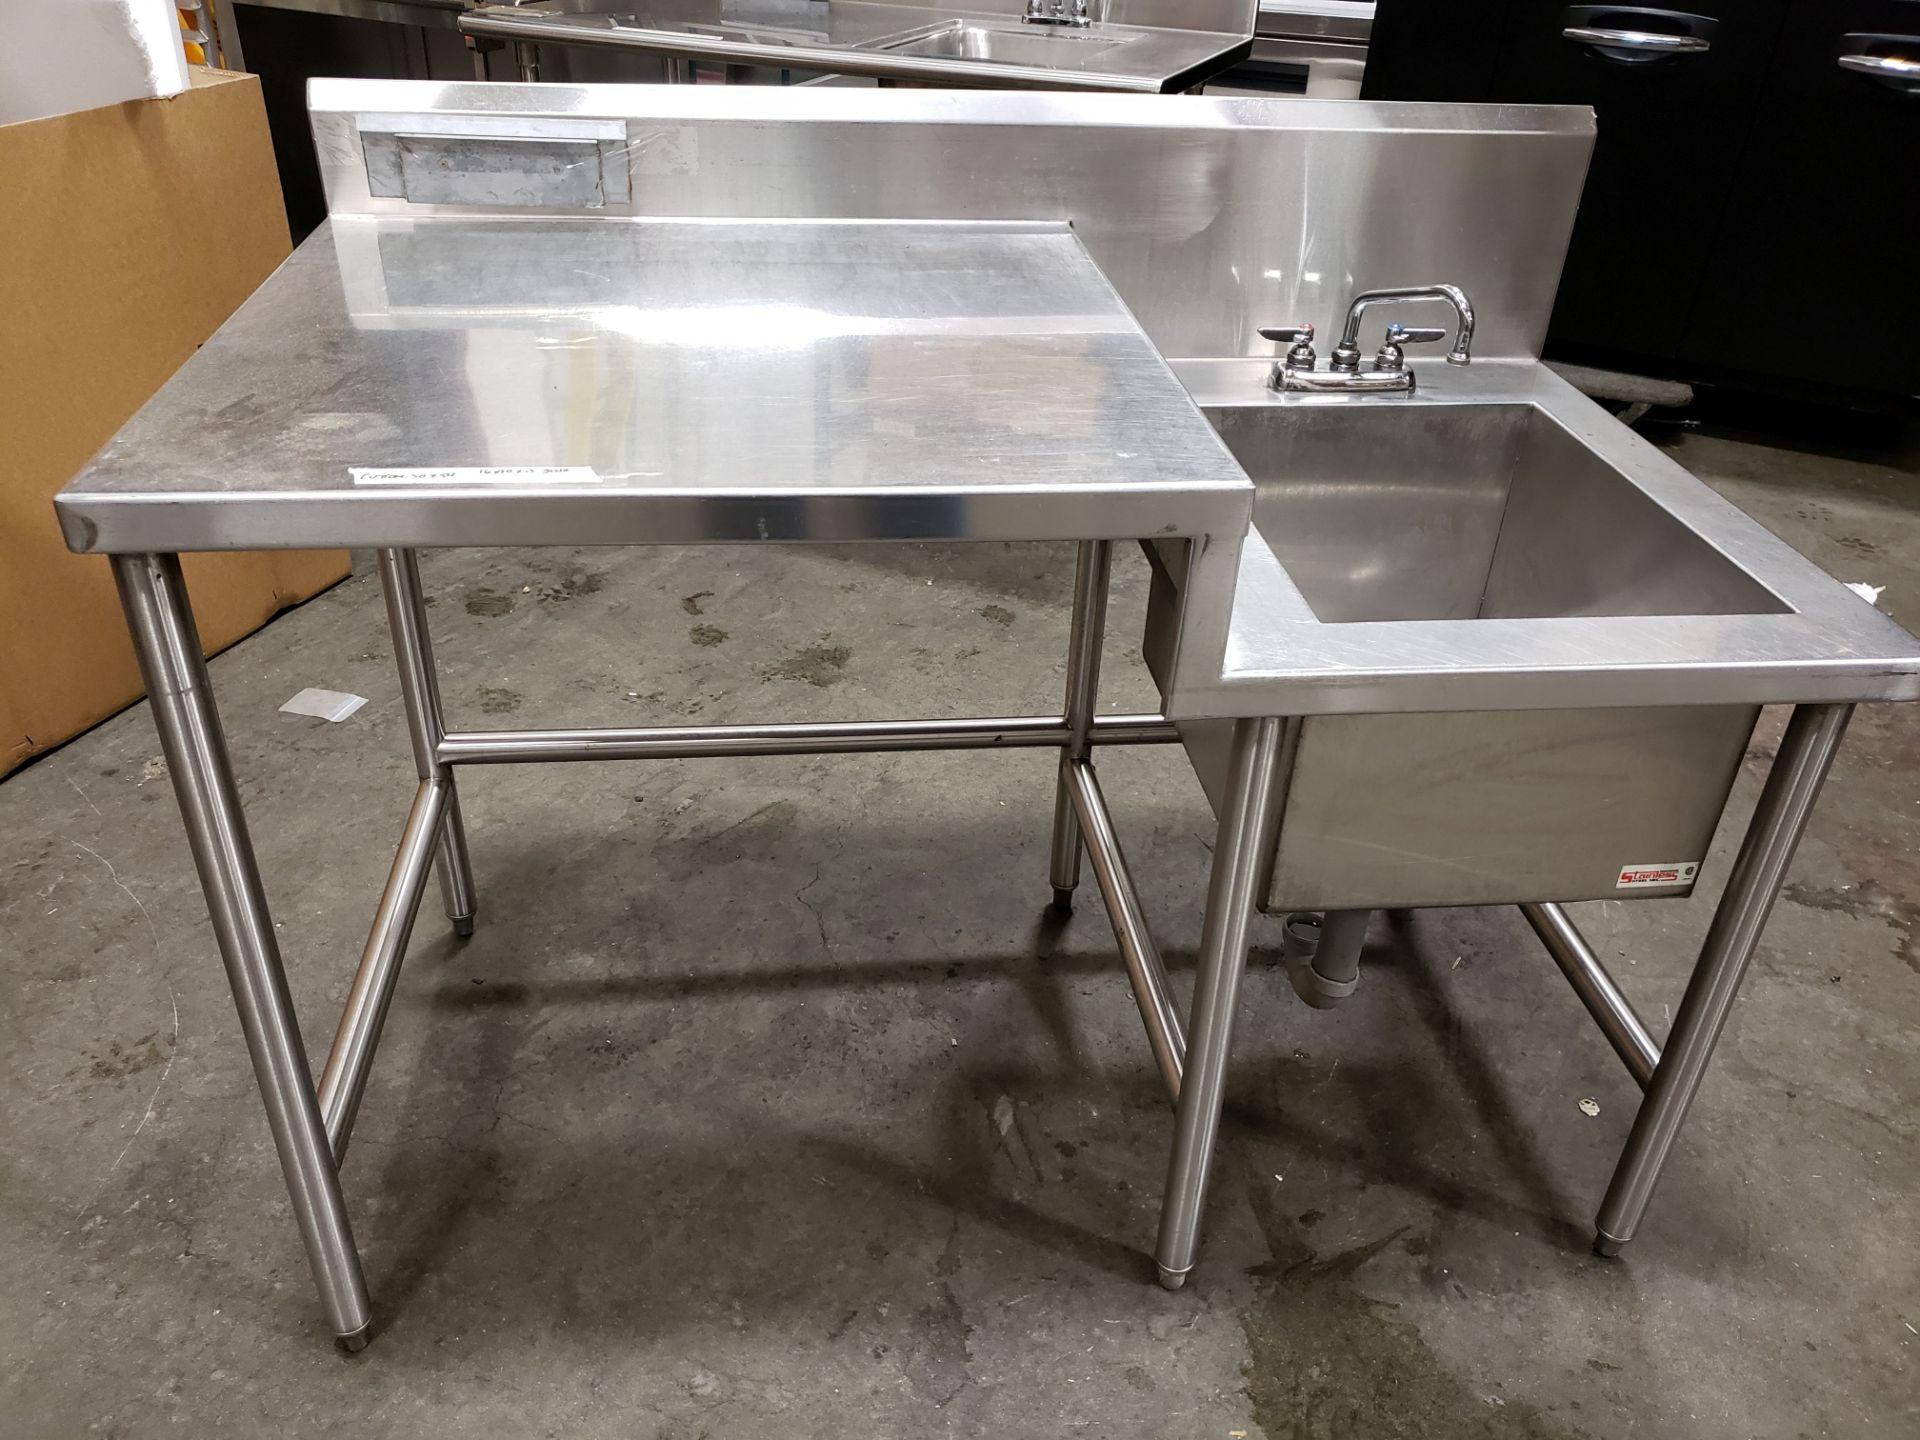 Custom 30" x 54" Stainless Work Table with 16" x 20" Sink